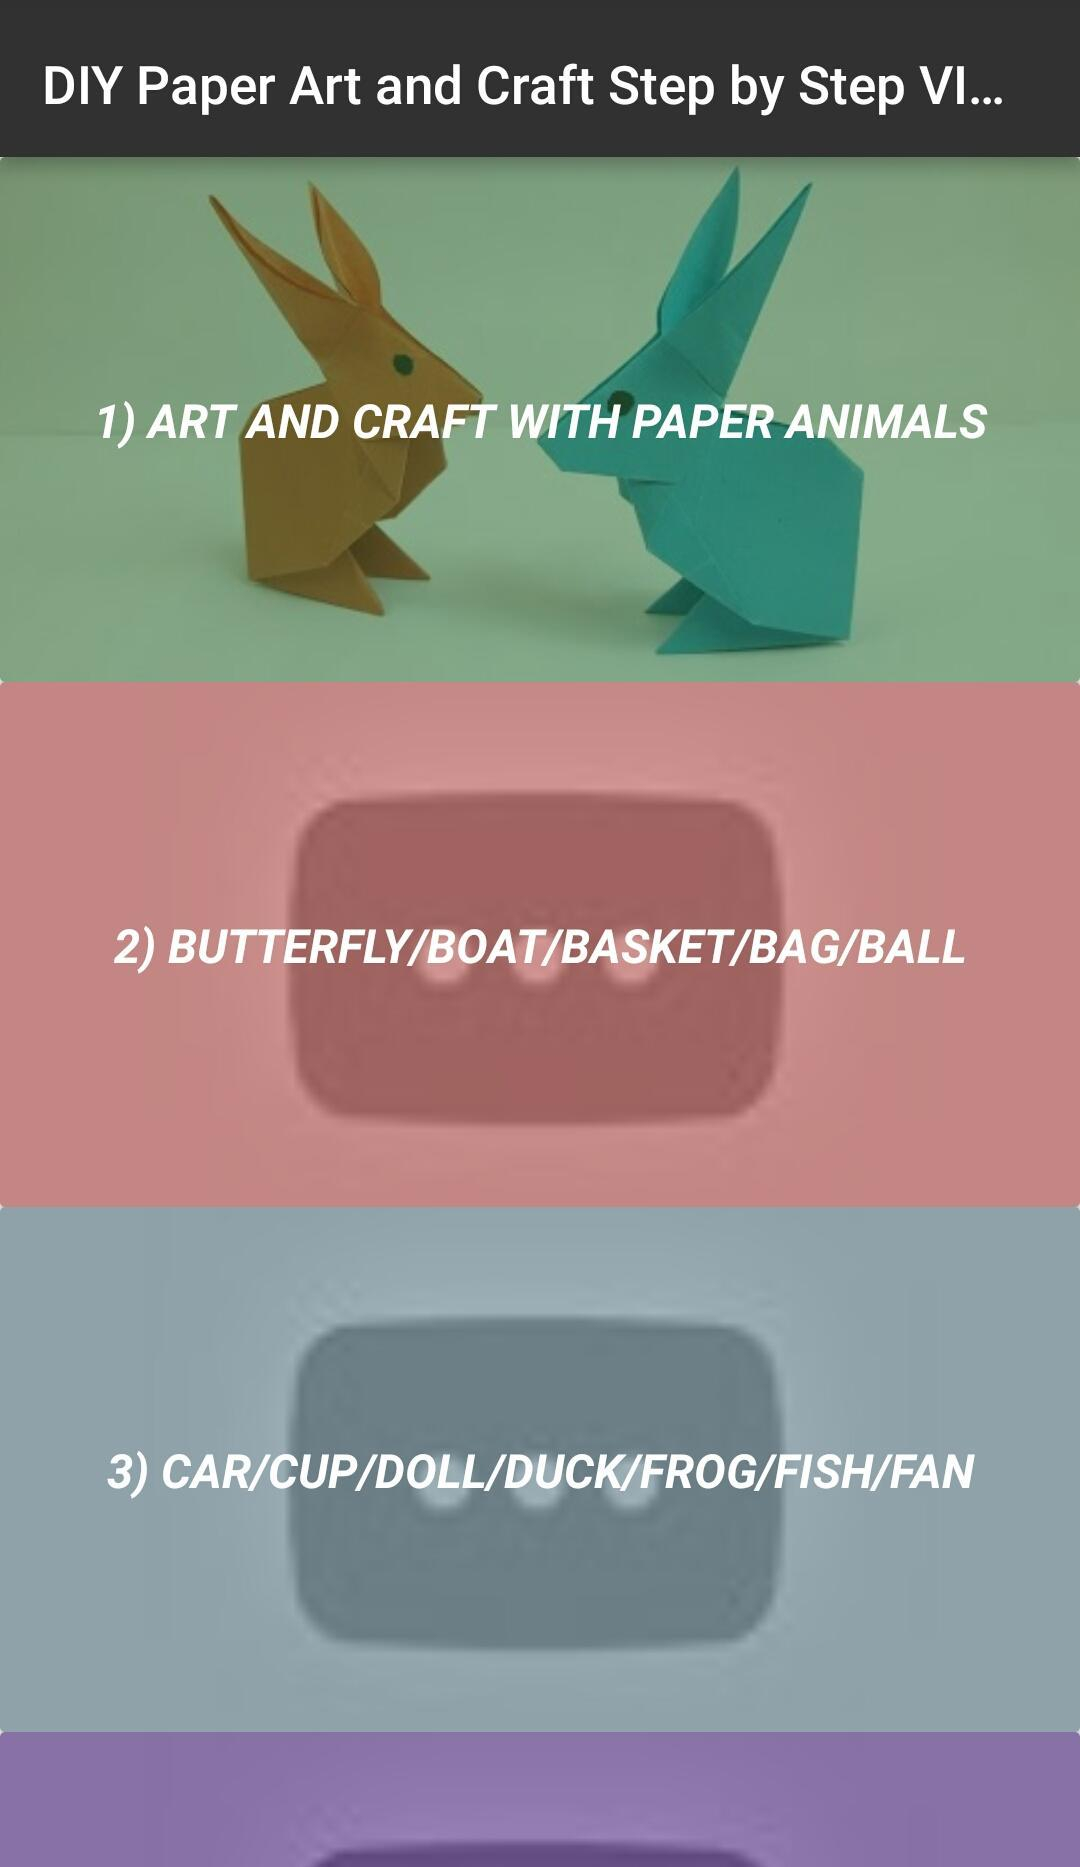 Download Origami Videos Diy Paper Art And Craft Step Step Videos App For Android Apk